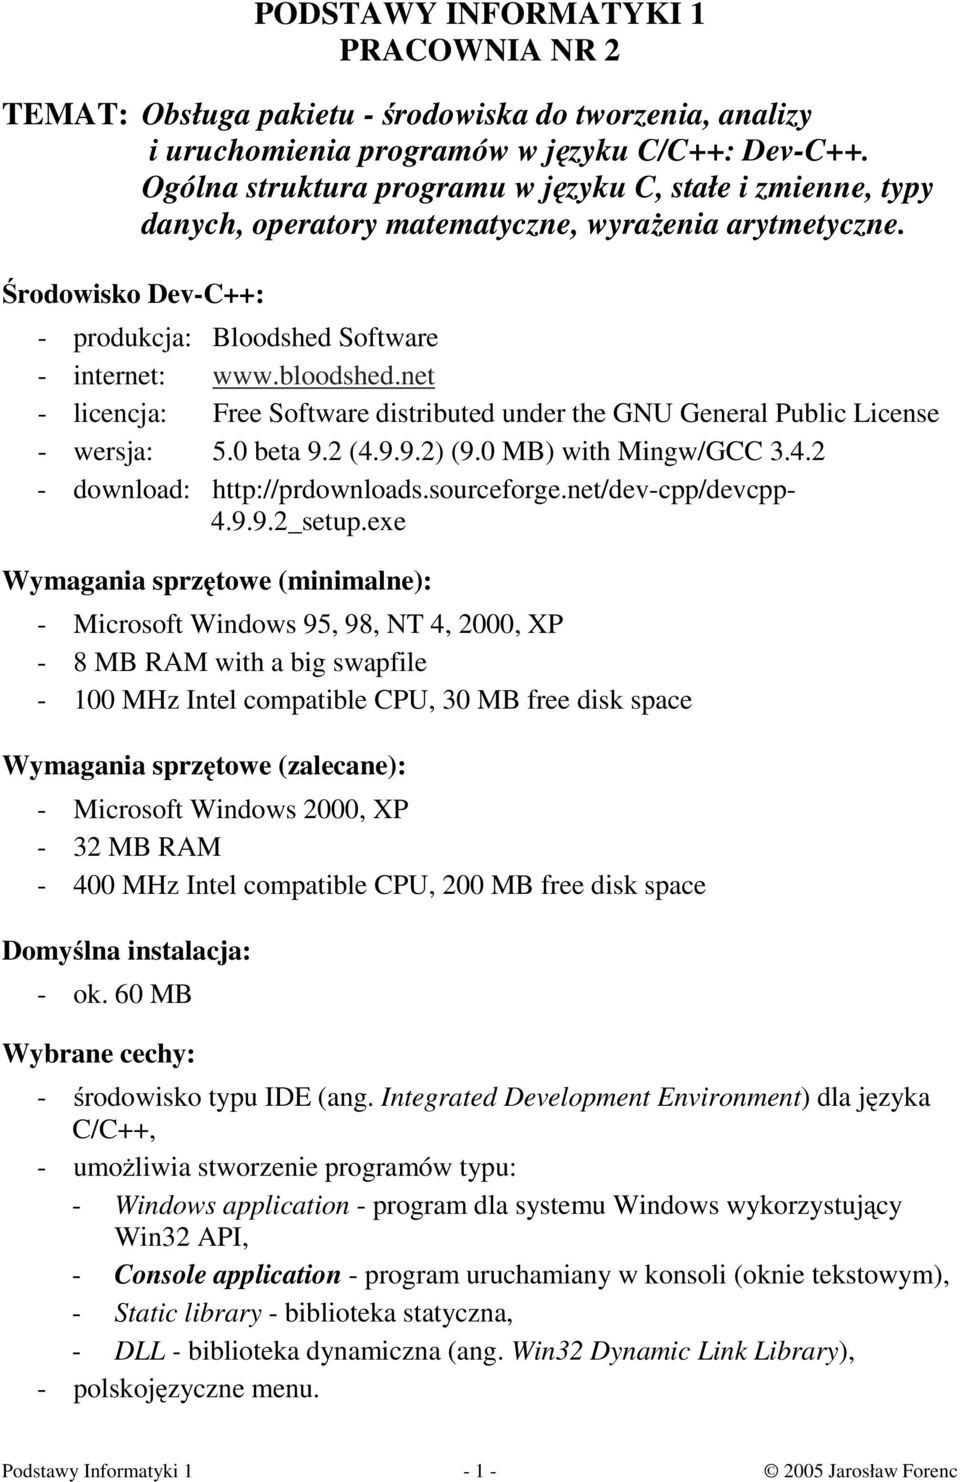 net - licencja: Free Software distributed under the GNU General Public License - wersja: 5.0 beta 9.2 (4.9.9.2) (9.0 MB) with Mingw/GCC 3.4.2 - download: http://prdownloads.sourceforge.